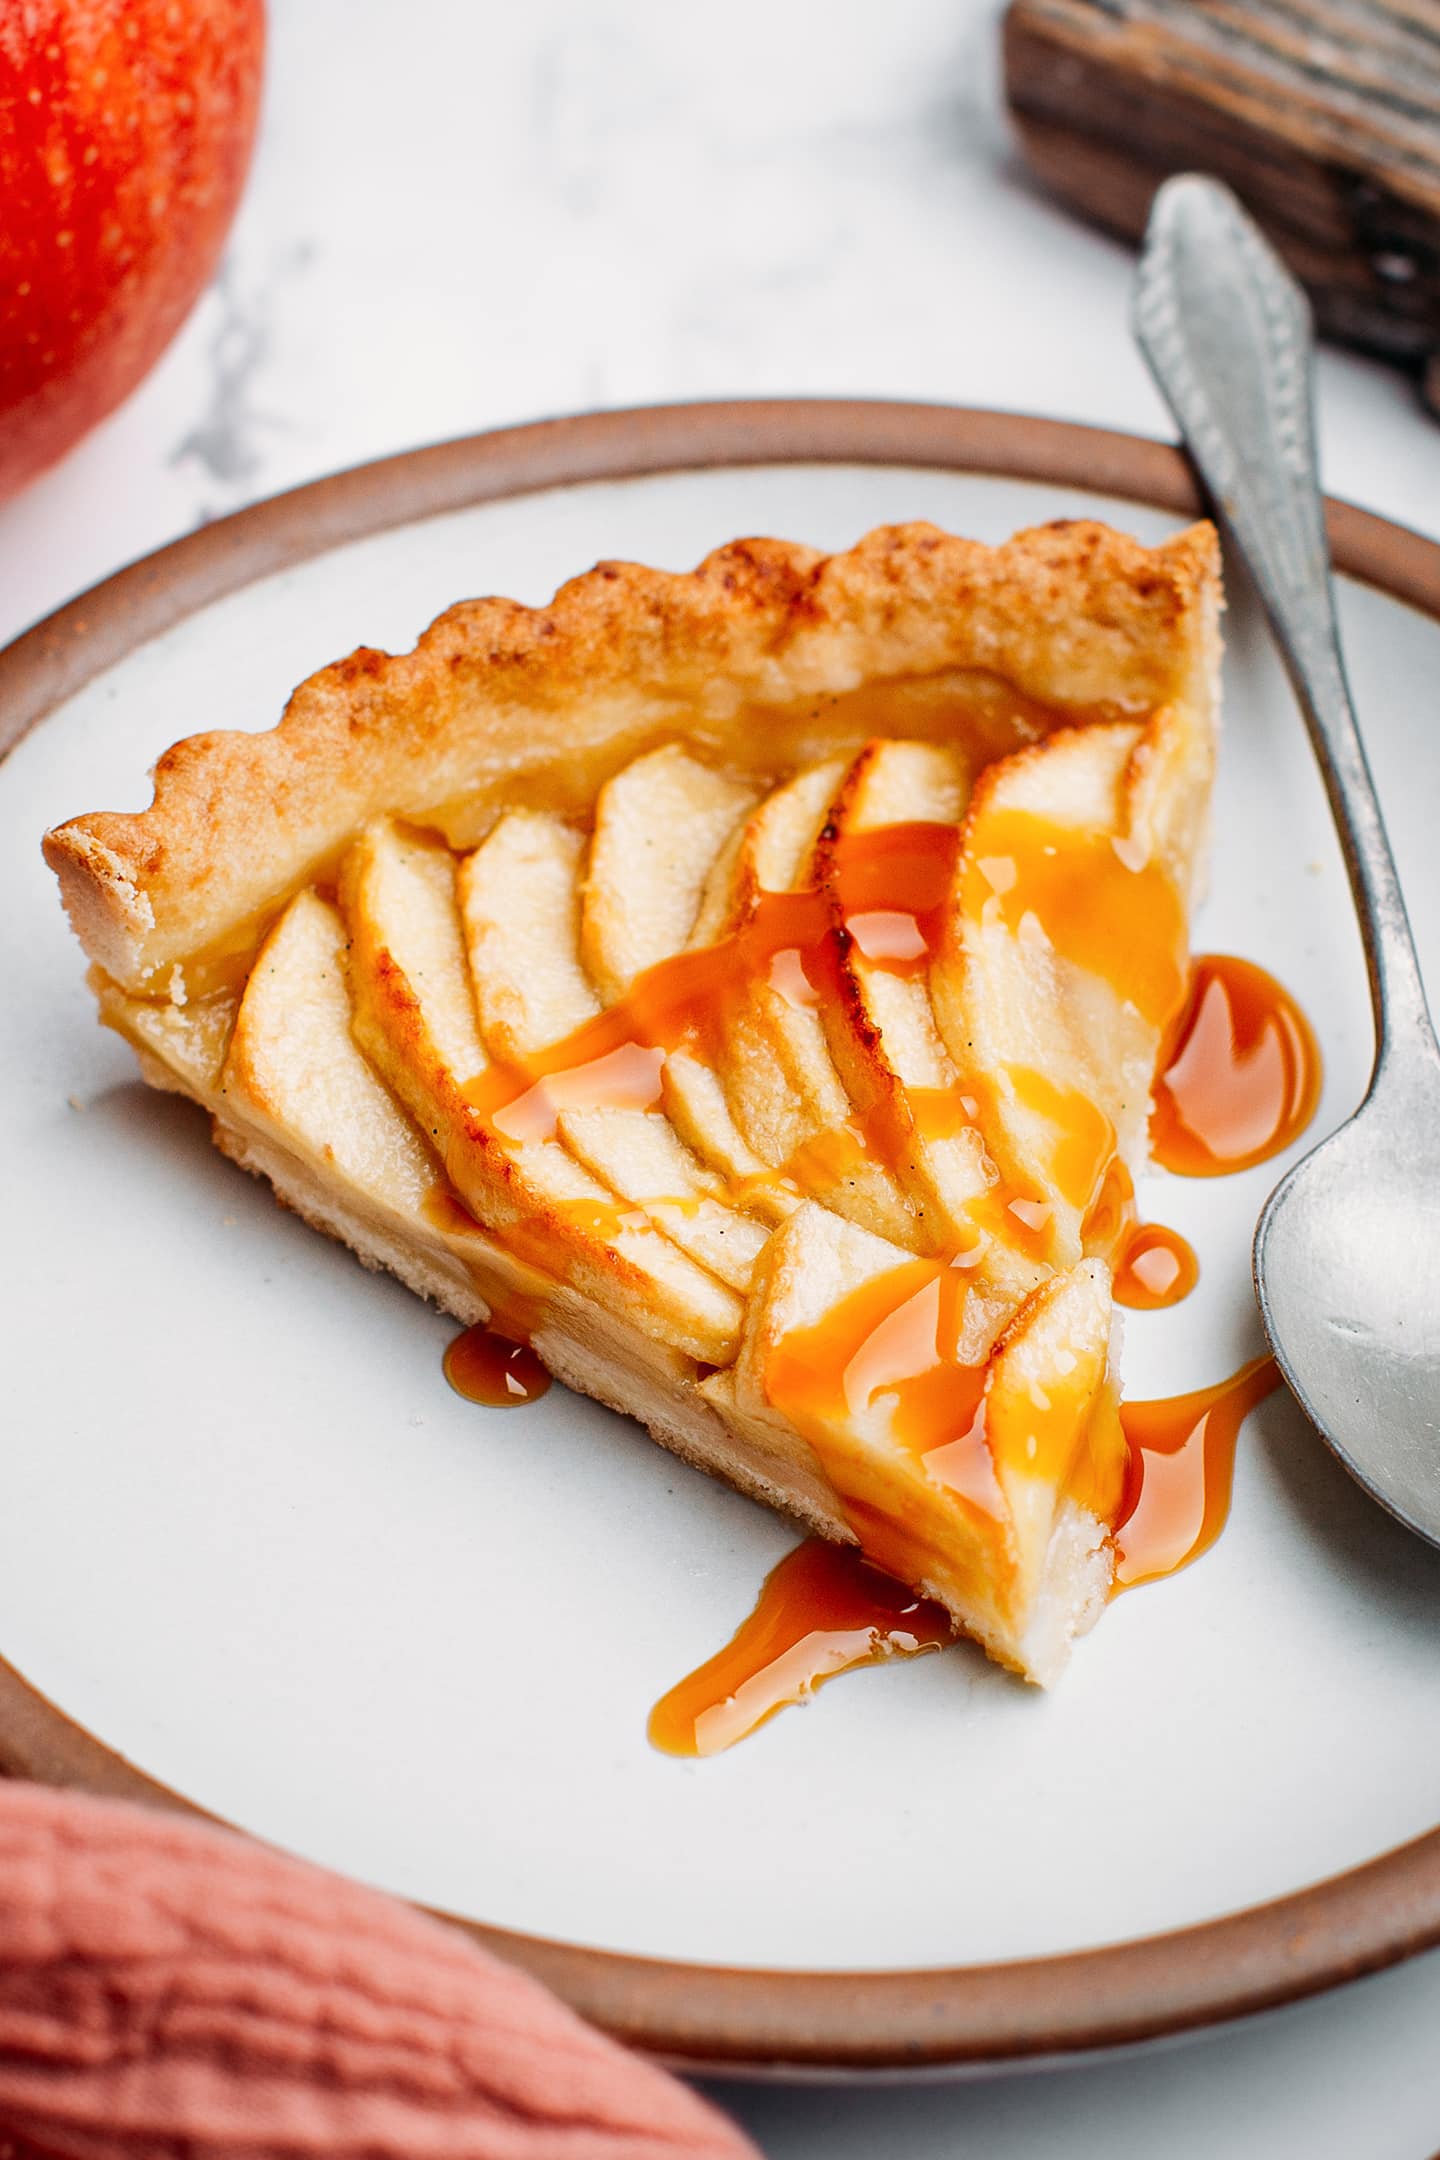 Slice of apple tart drizzled with caramel sauce.